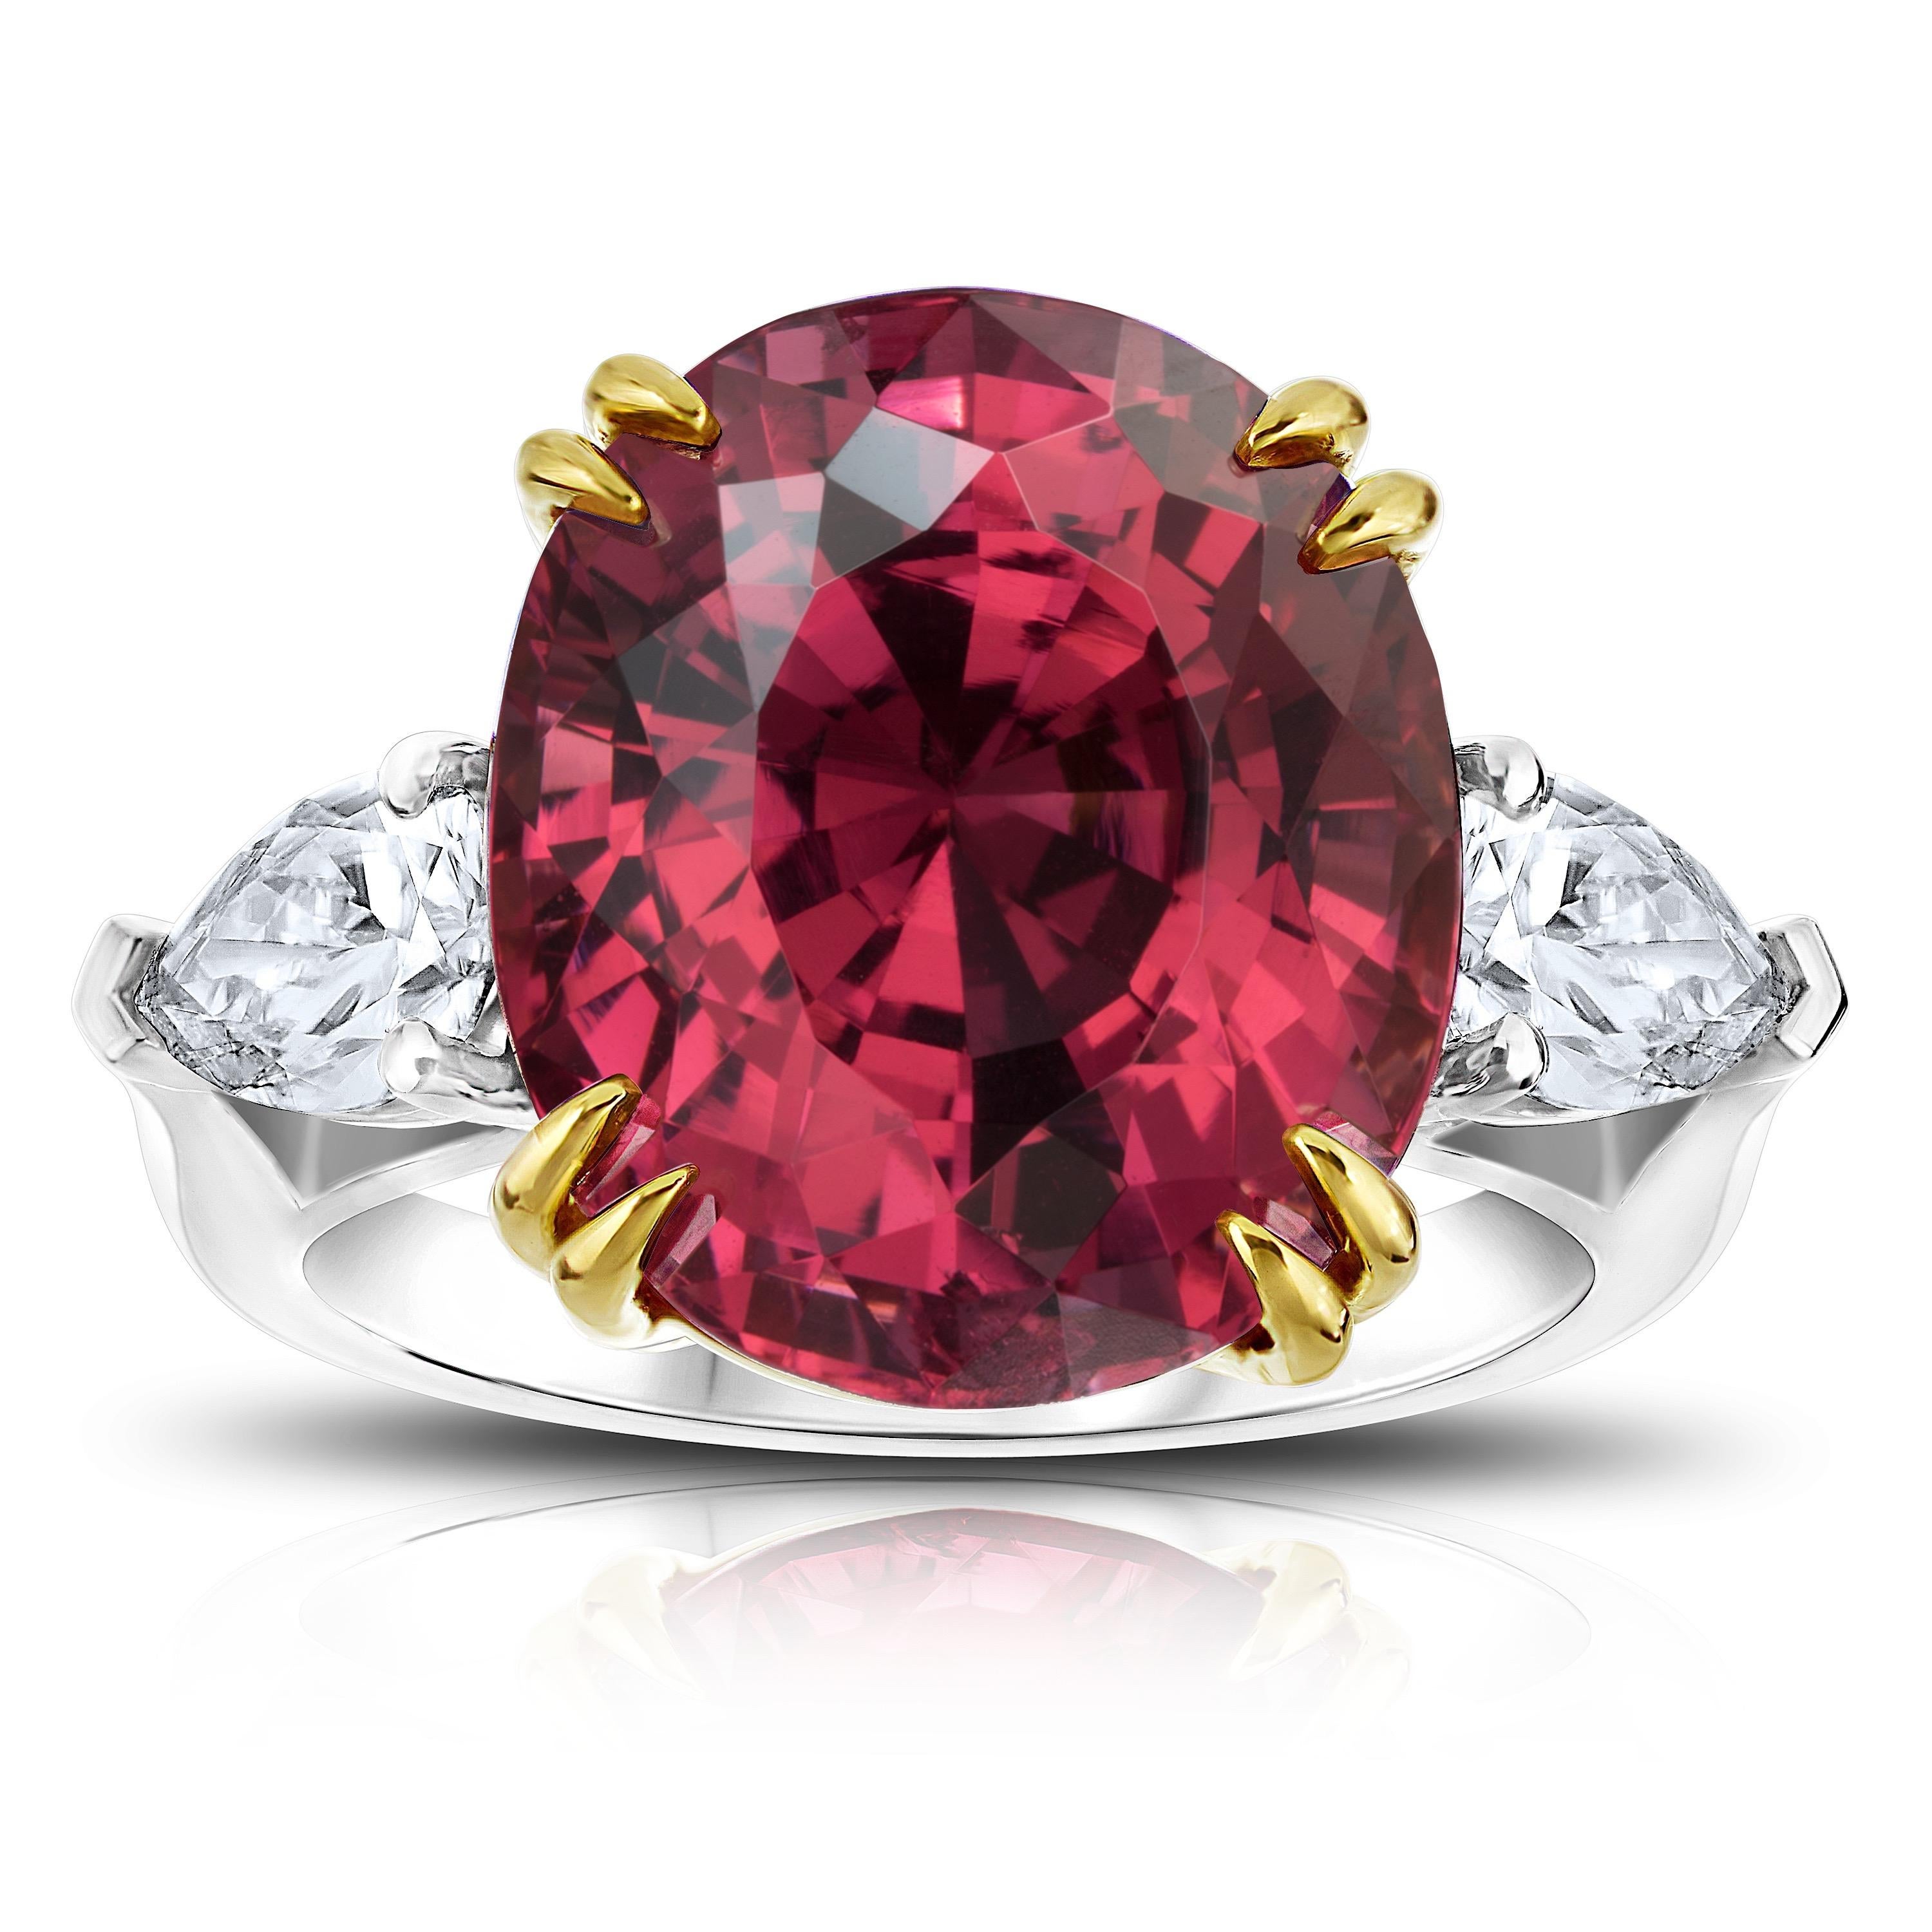 15.13 carat Red Spinel three stone ring with pear shape diamonds weighing 1.03 carats set in a custom platinum ring with 18k yellow gold basket.

